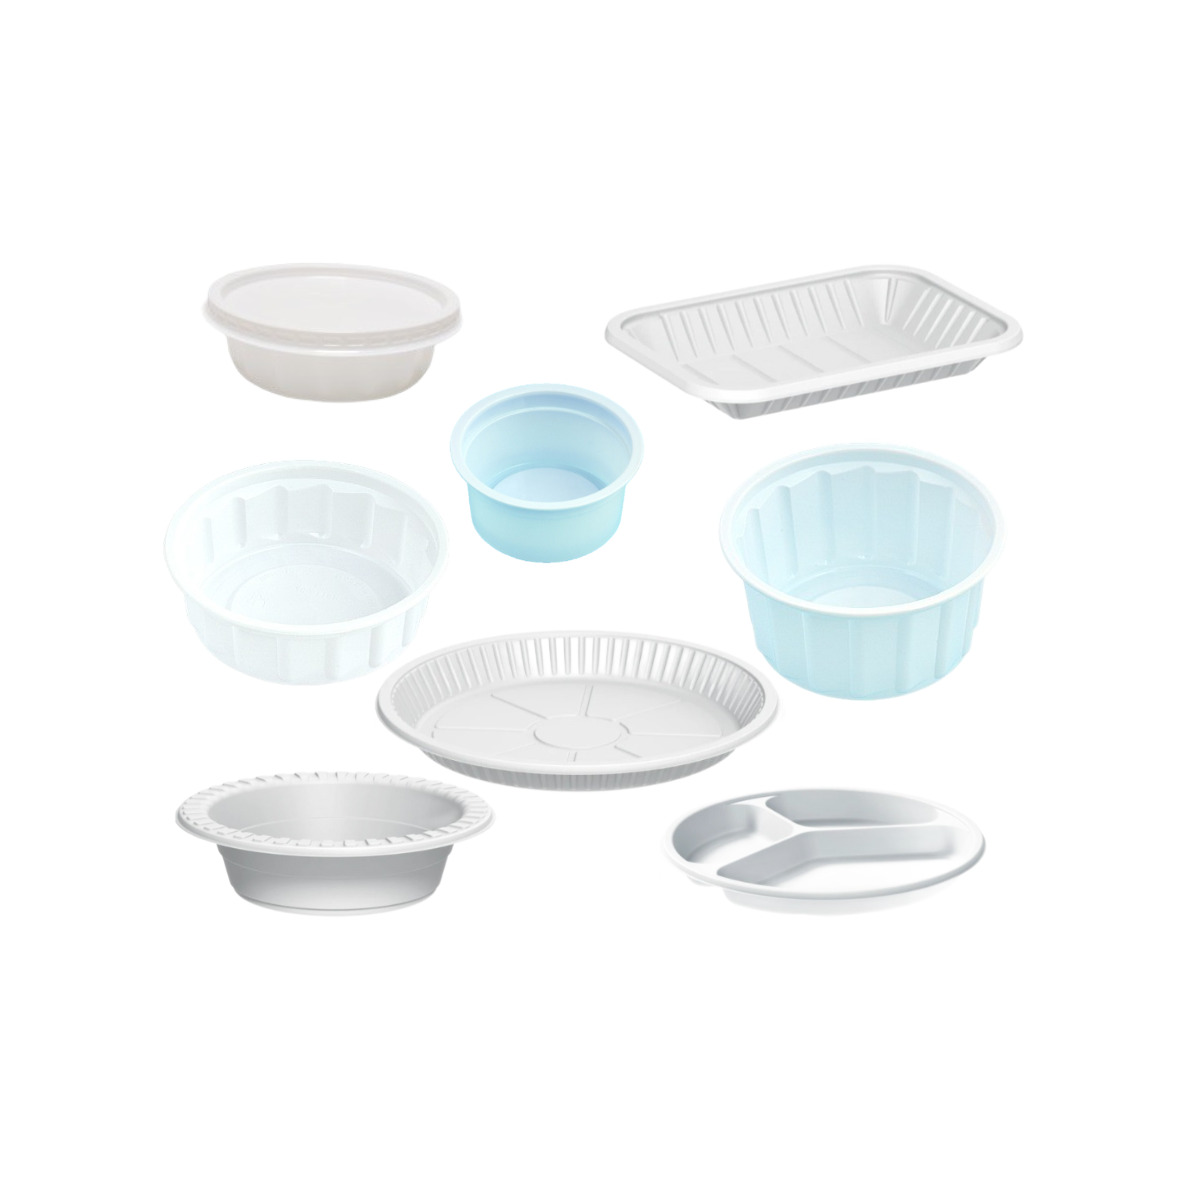 Plastic Containers & Plates